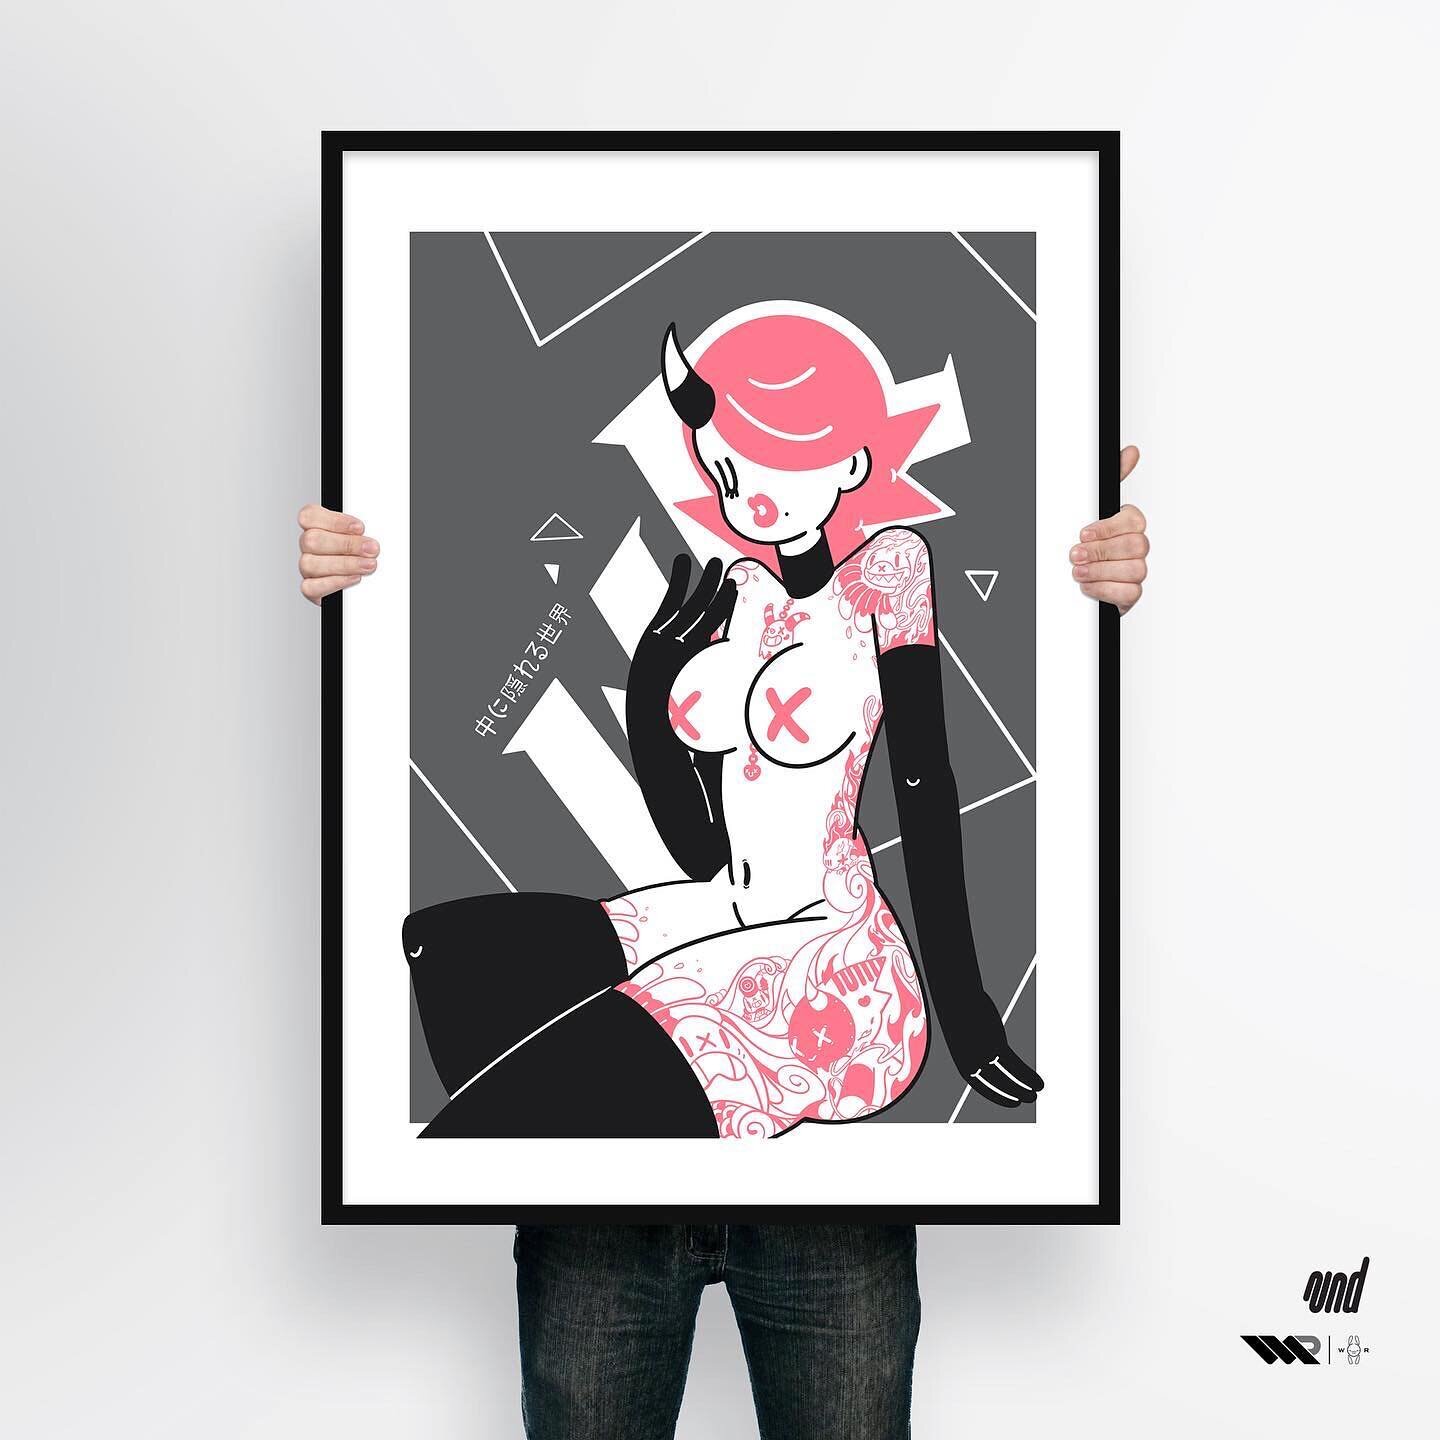 &bull;
We are please to present a limited art print run with studio 2ND2FRIEND. 

The Hidden World - is an aptly named imaginative styling of the WRVerse characters in the 2F world.

The NOIR Edition print will be time-limited over this weekend comme